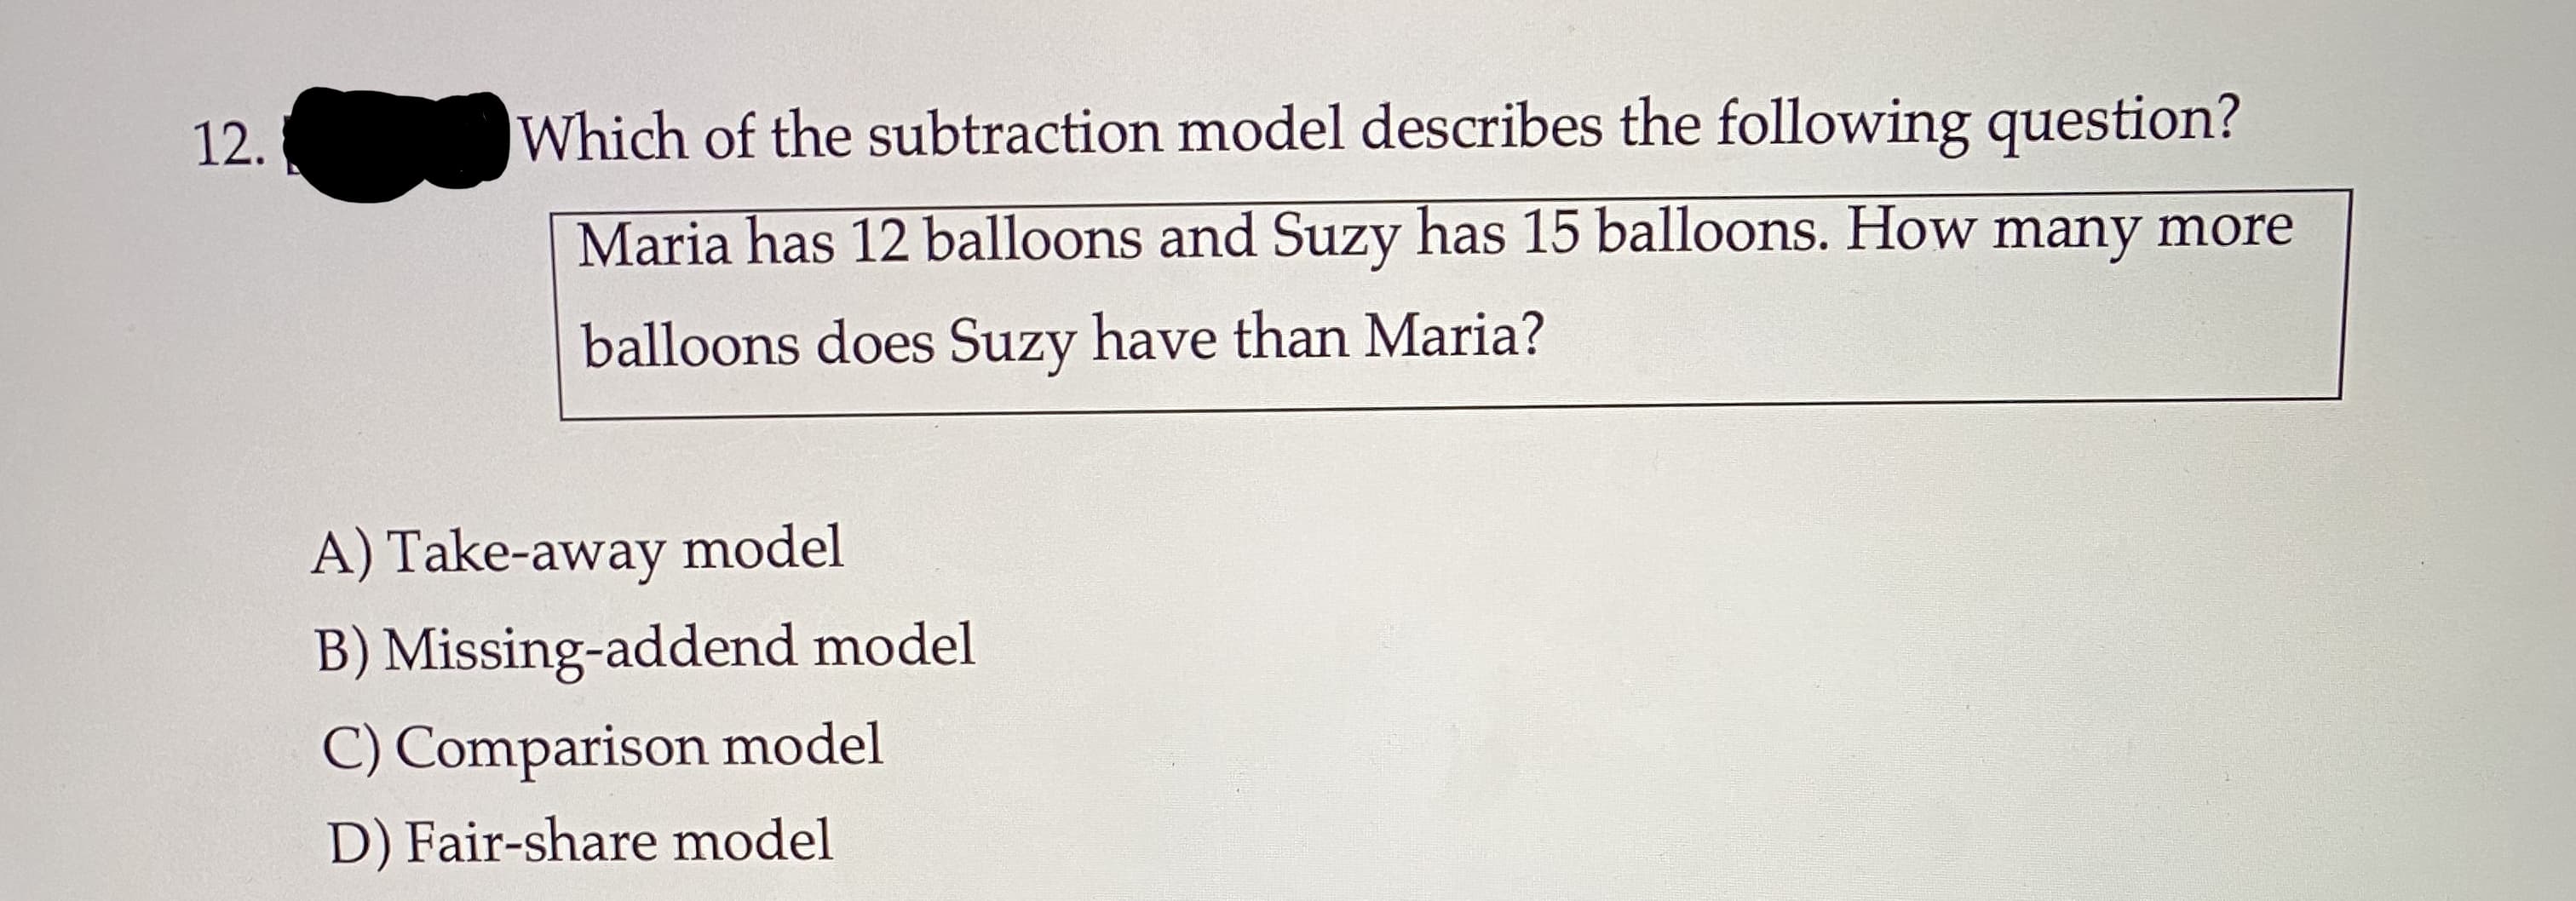 Which of the subtraction model describes the following question?
Maria has 12 balloons and Suzy has 15 balloons. How many more
balloons does Suzy have than Maria?
A) Take-away model
B) Missing-addend model
C) Comparison model
D) Fair-share model
